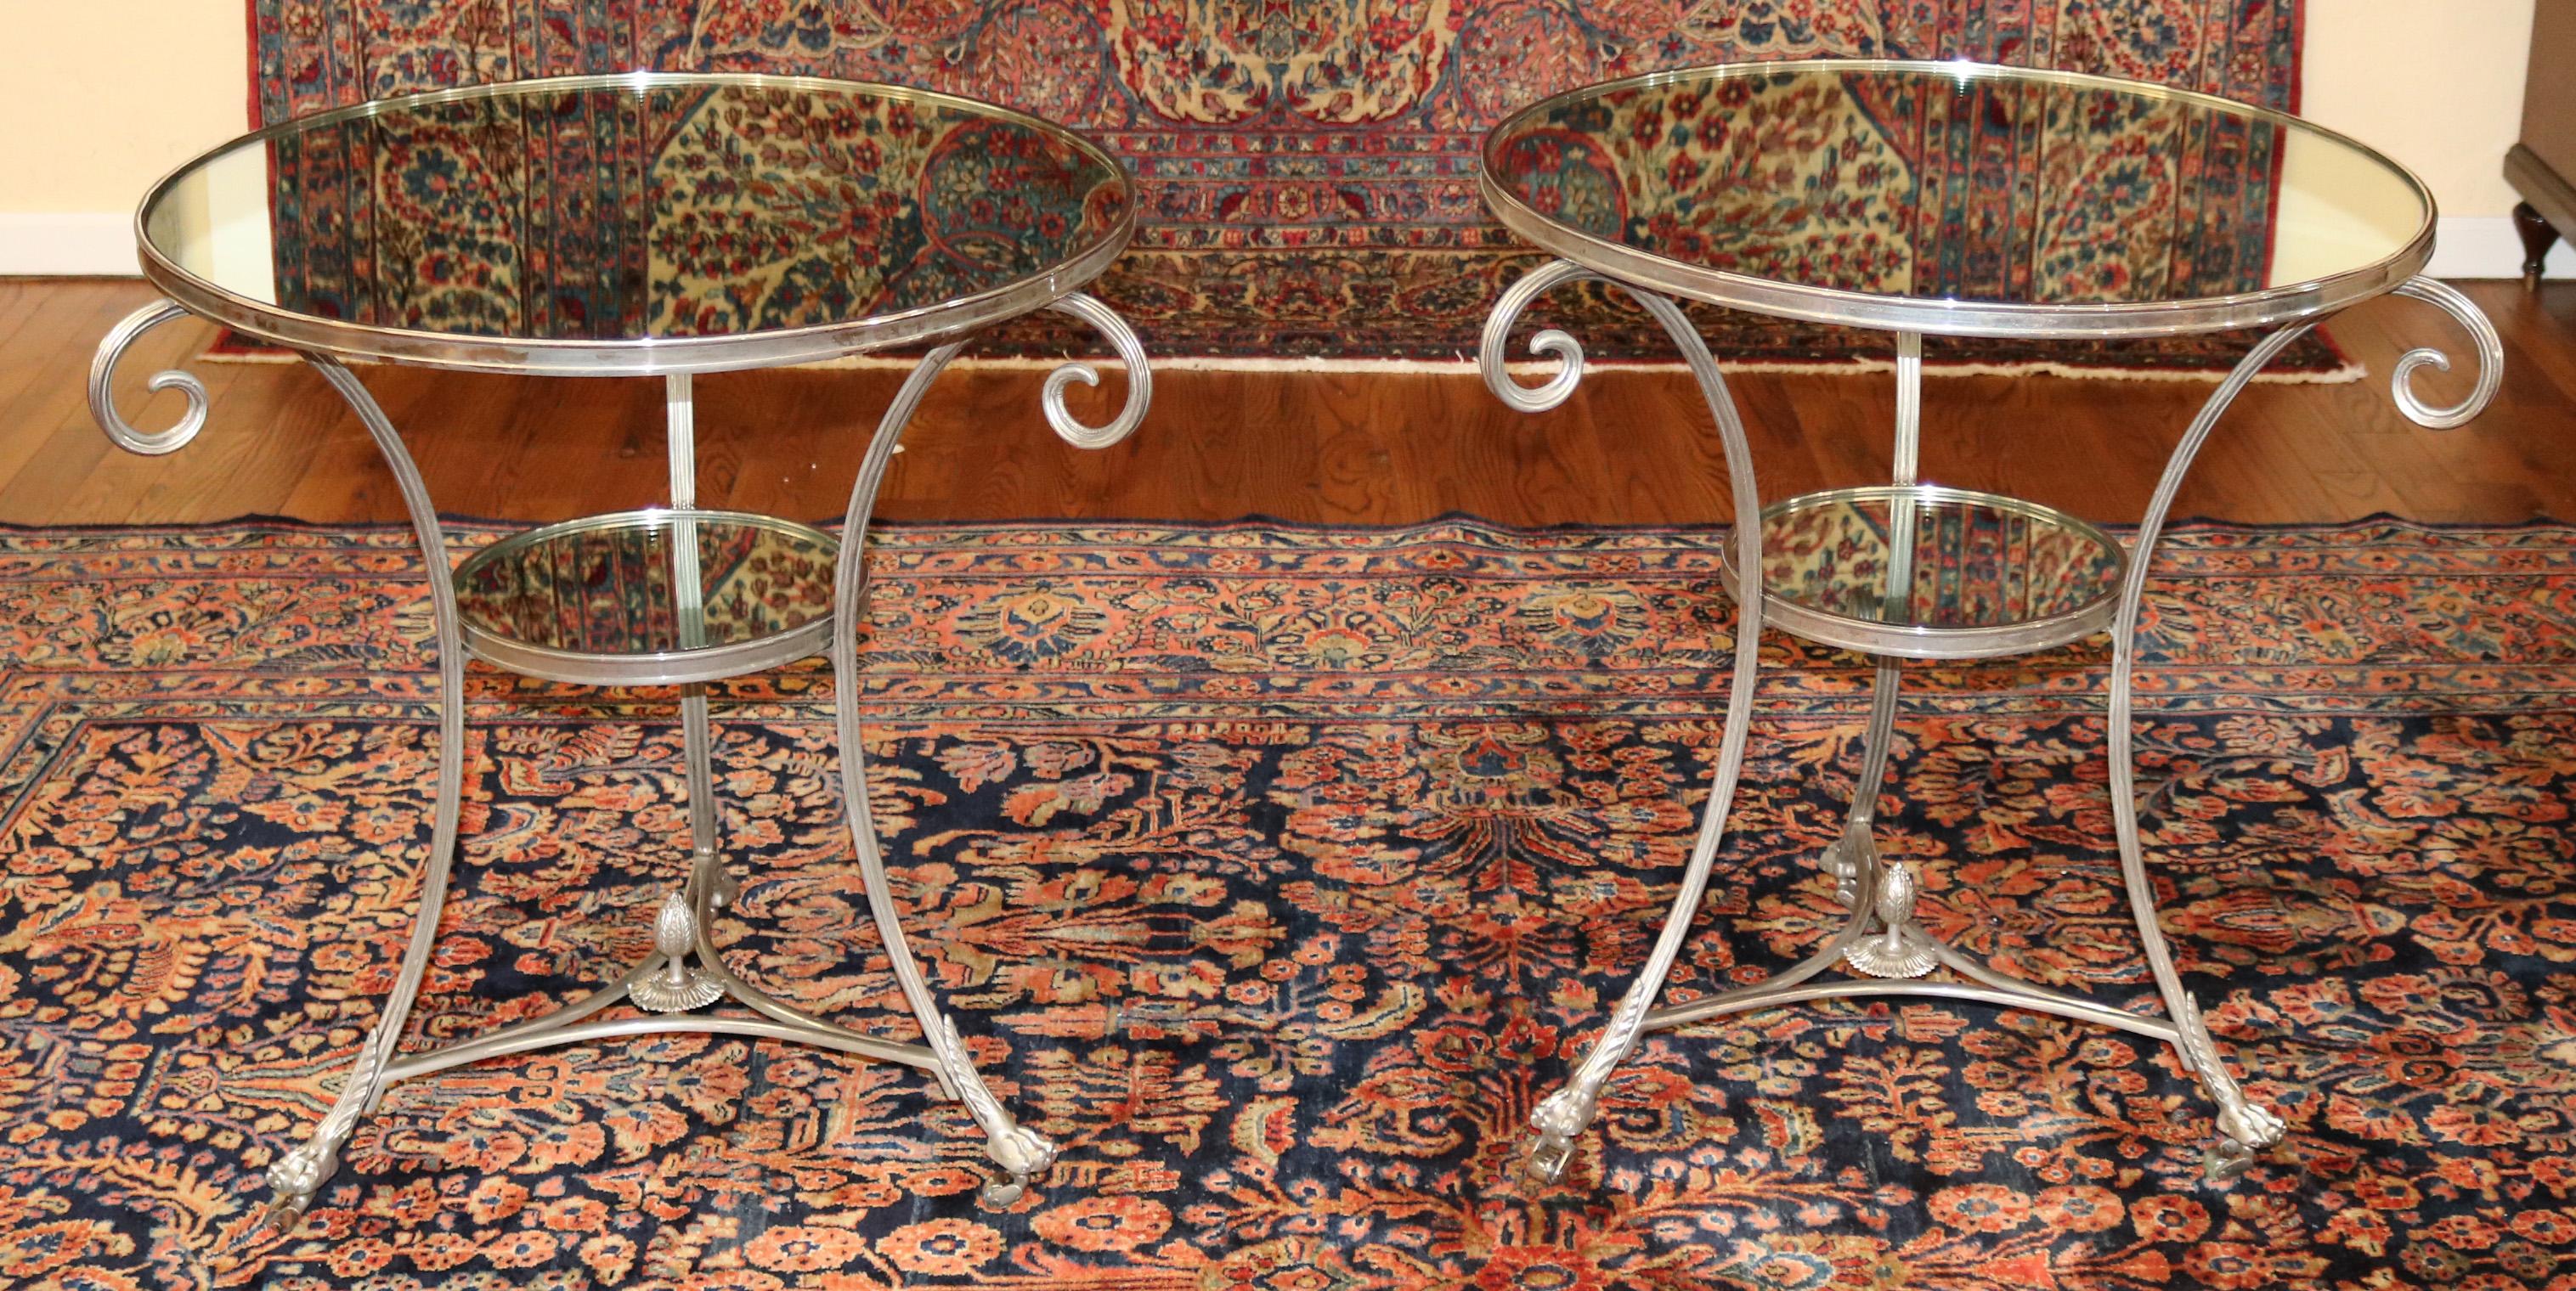 Pair of Vintage Directoire French Silver Plated Mirror Top Gueridon End Tables

Dimensions : 27